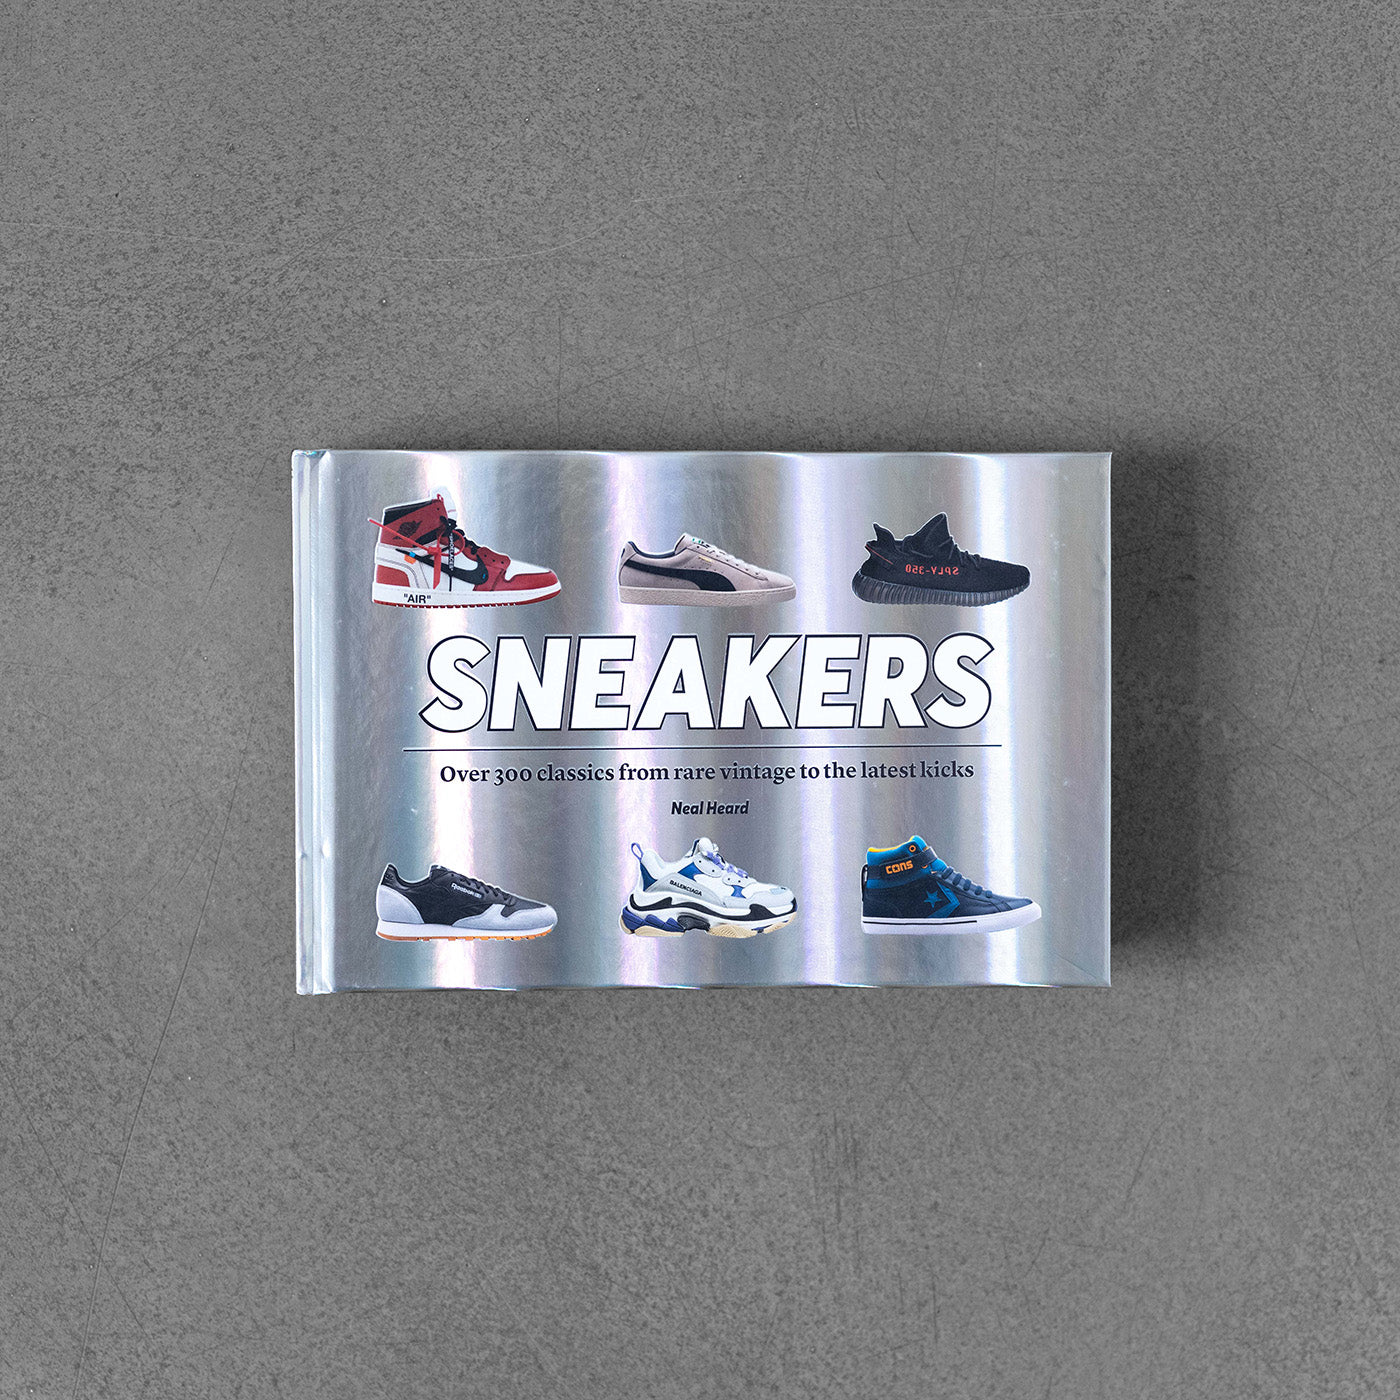 Sneakers: Over 300 classics from rare vintage to the latest kicks